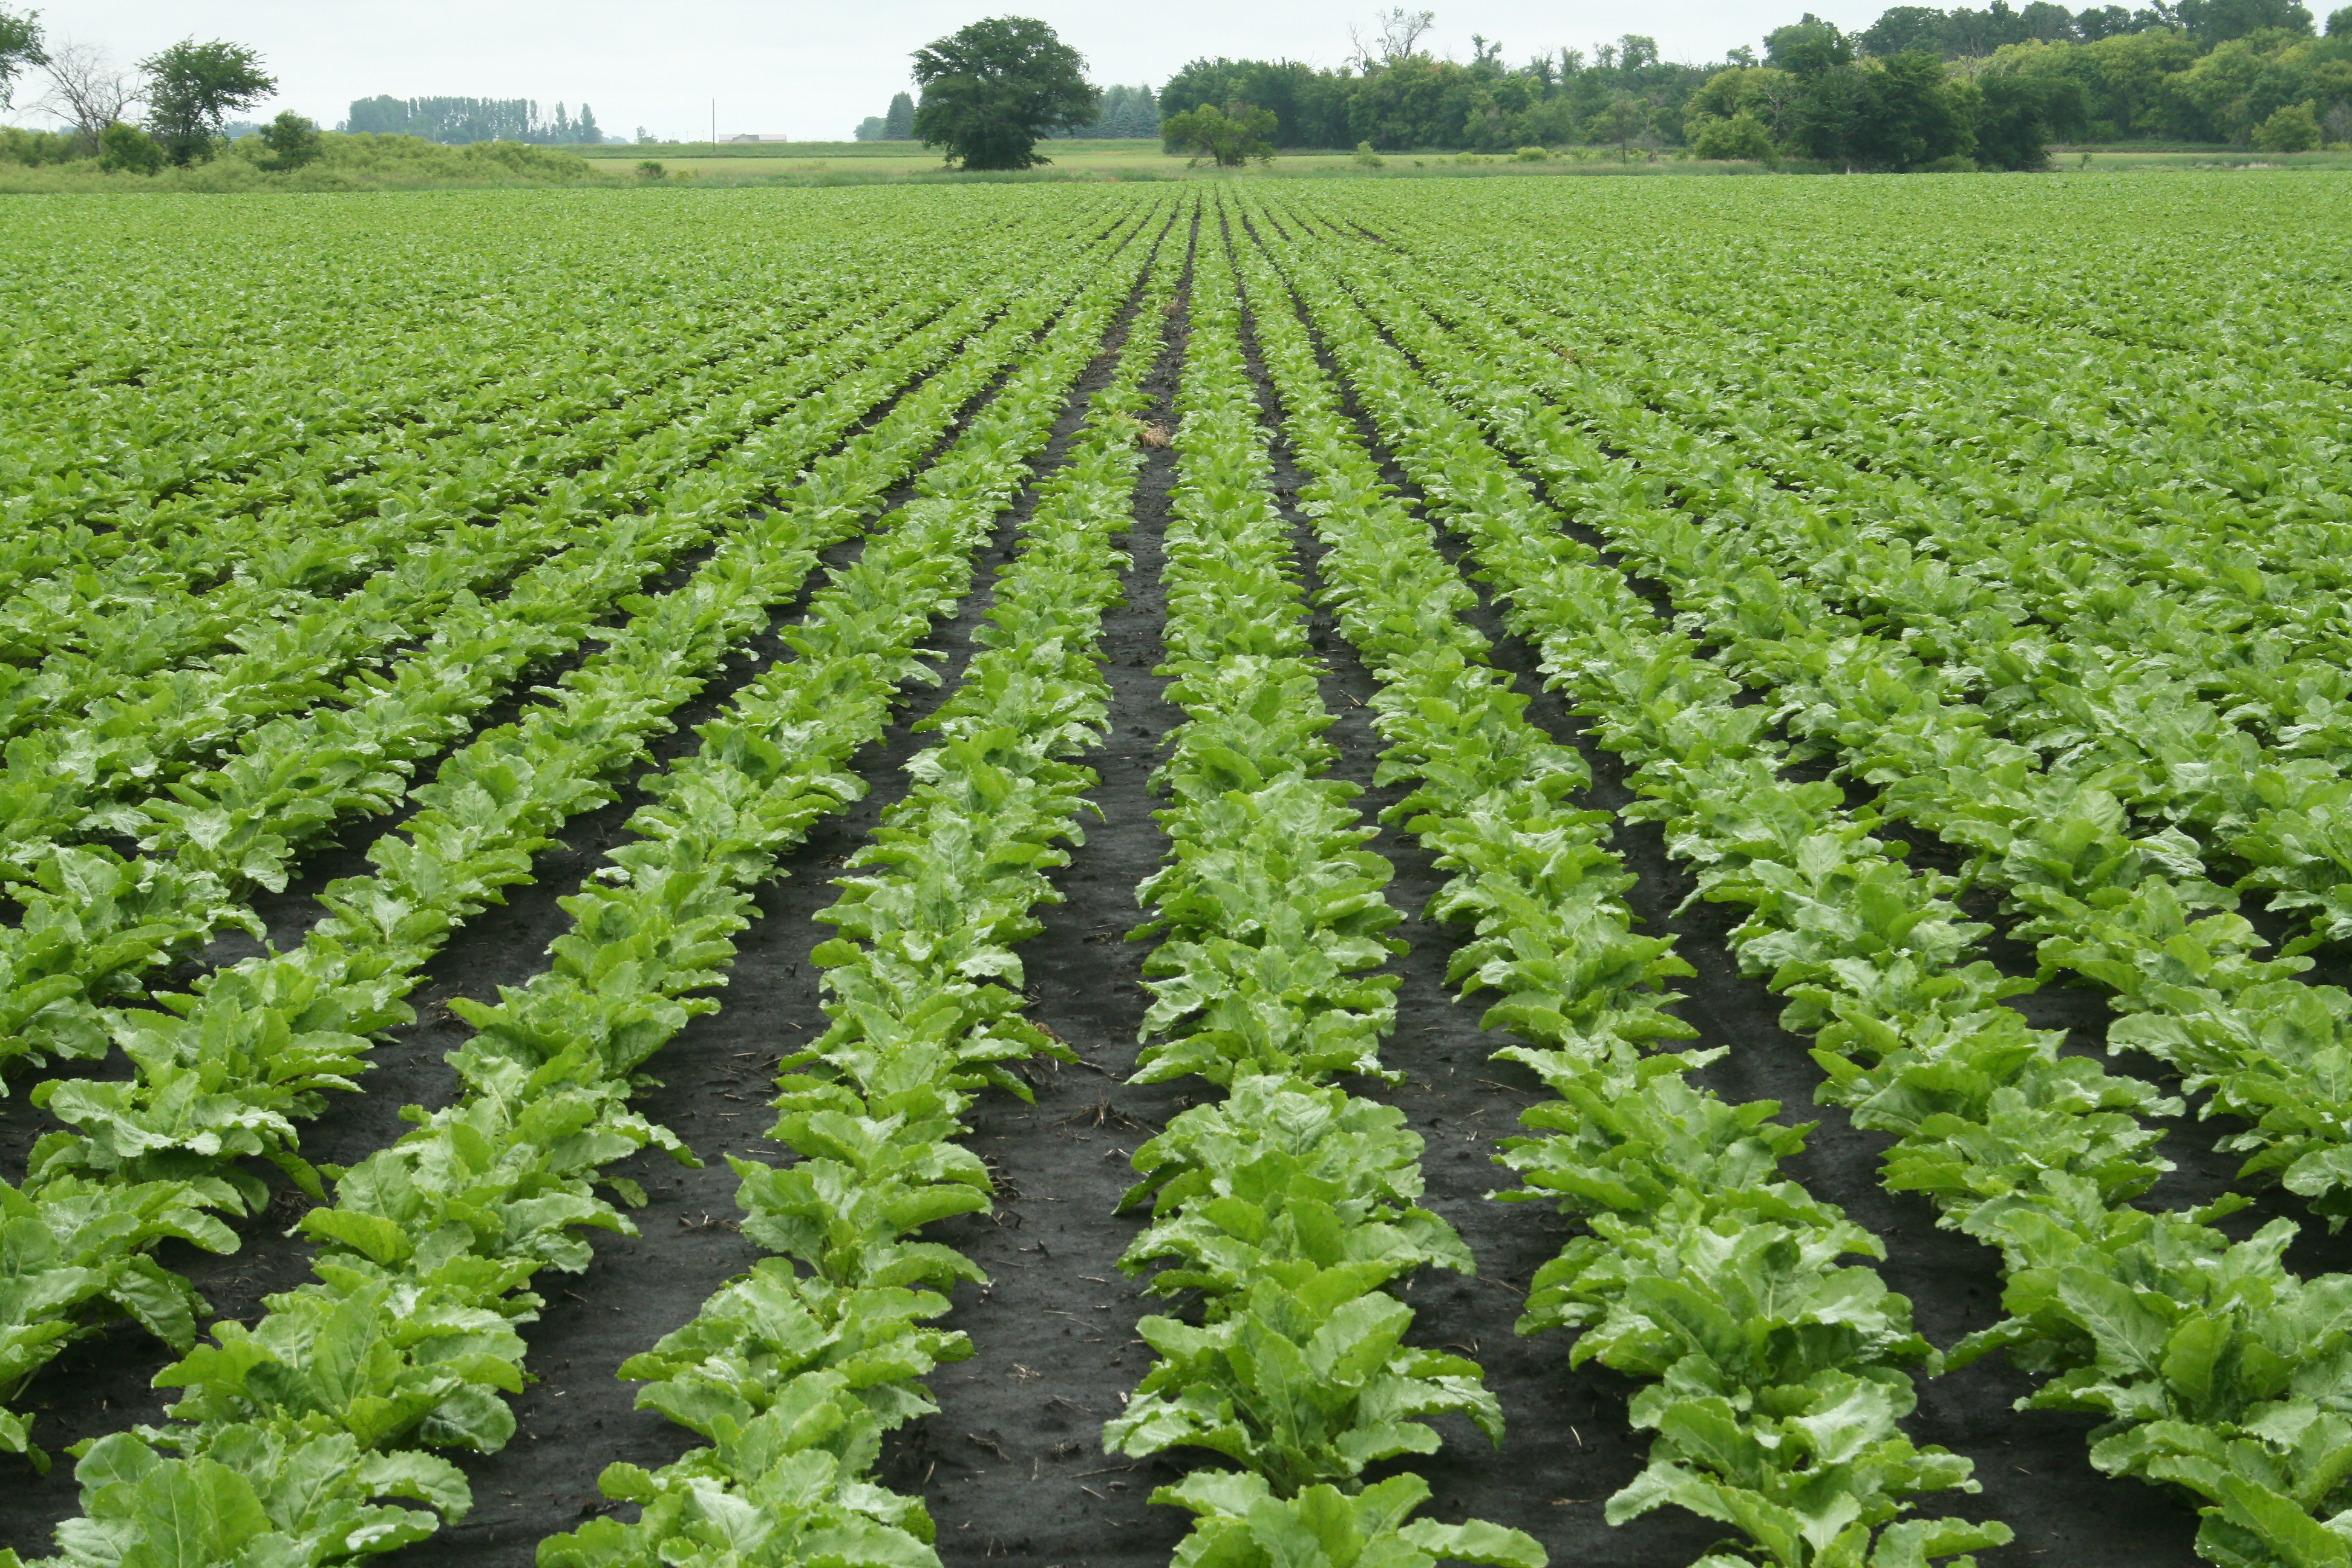 Sugarbeet growers and others will have an opportunity to learn about the latest sugarbeet research during the 51st annual Sugarbeet Research Reporting Session. (NDSU photo)